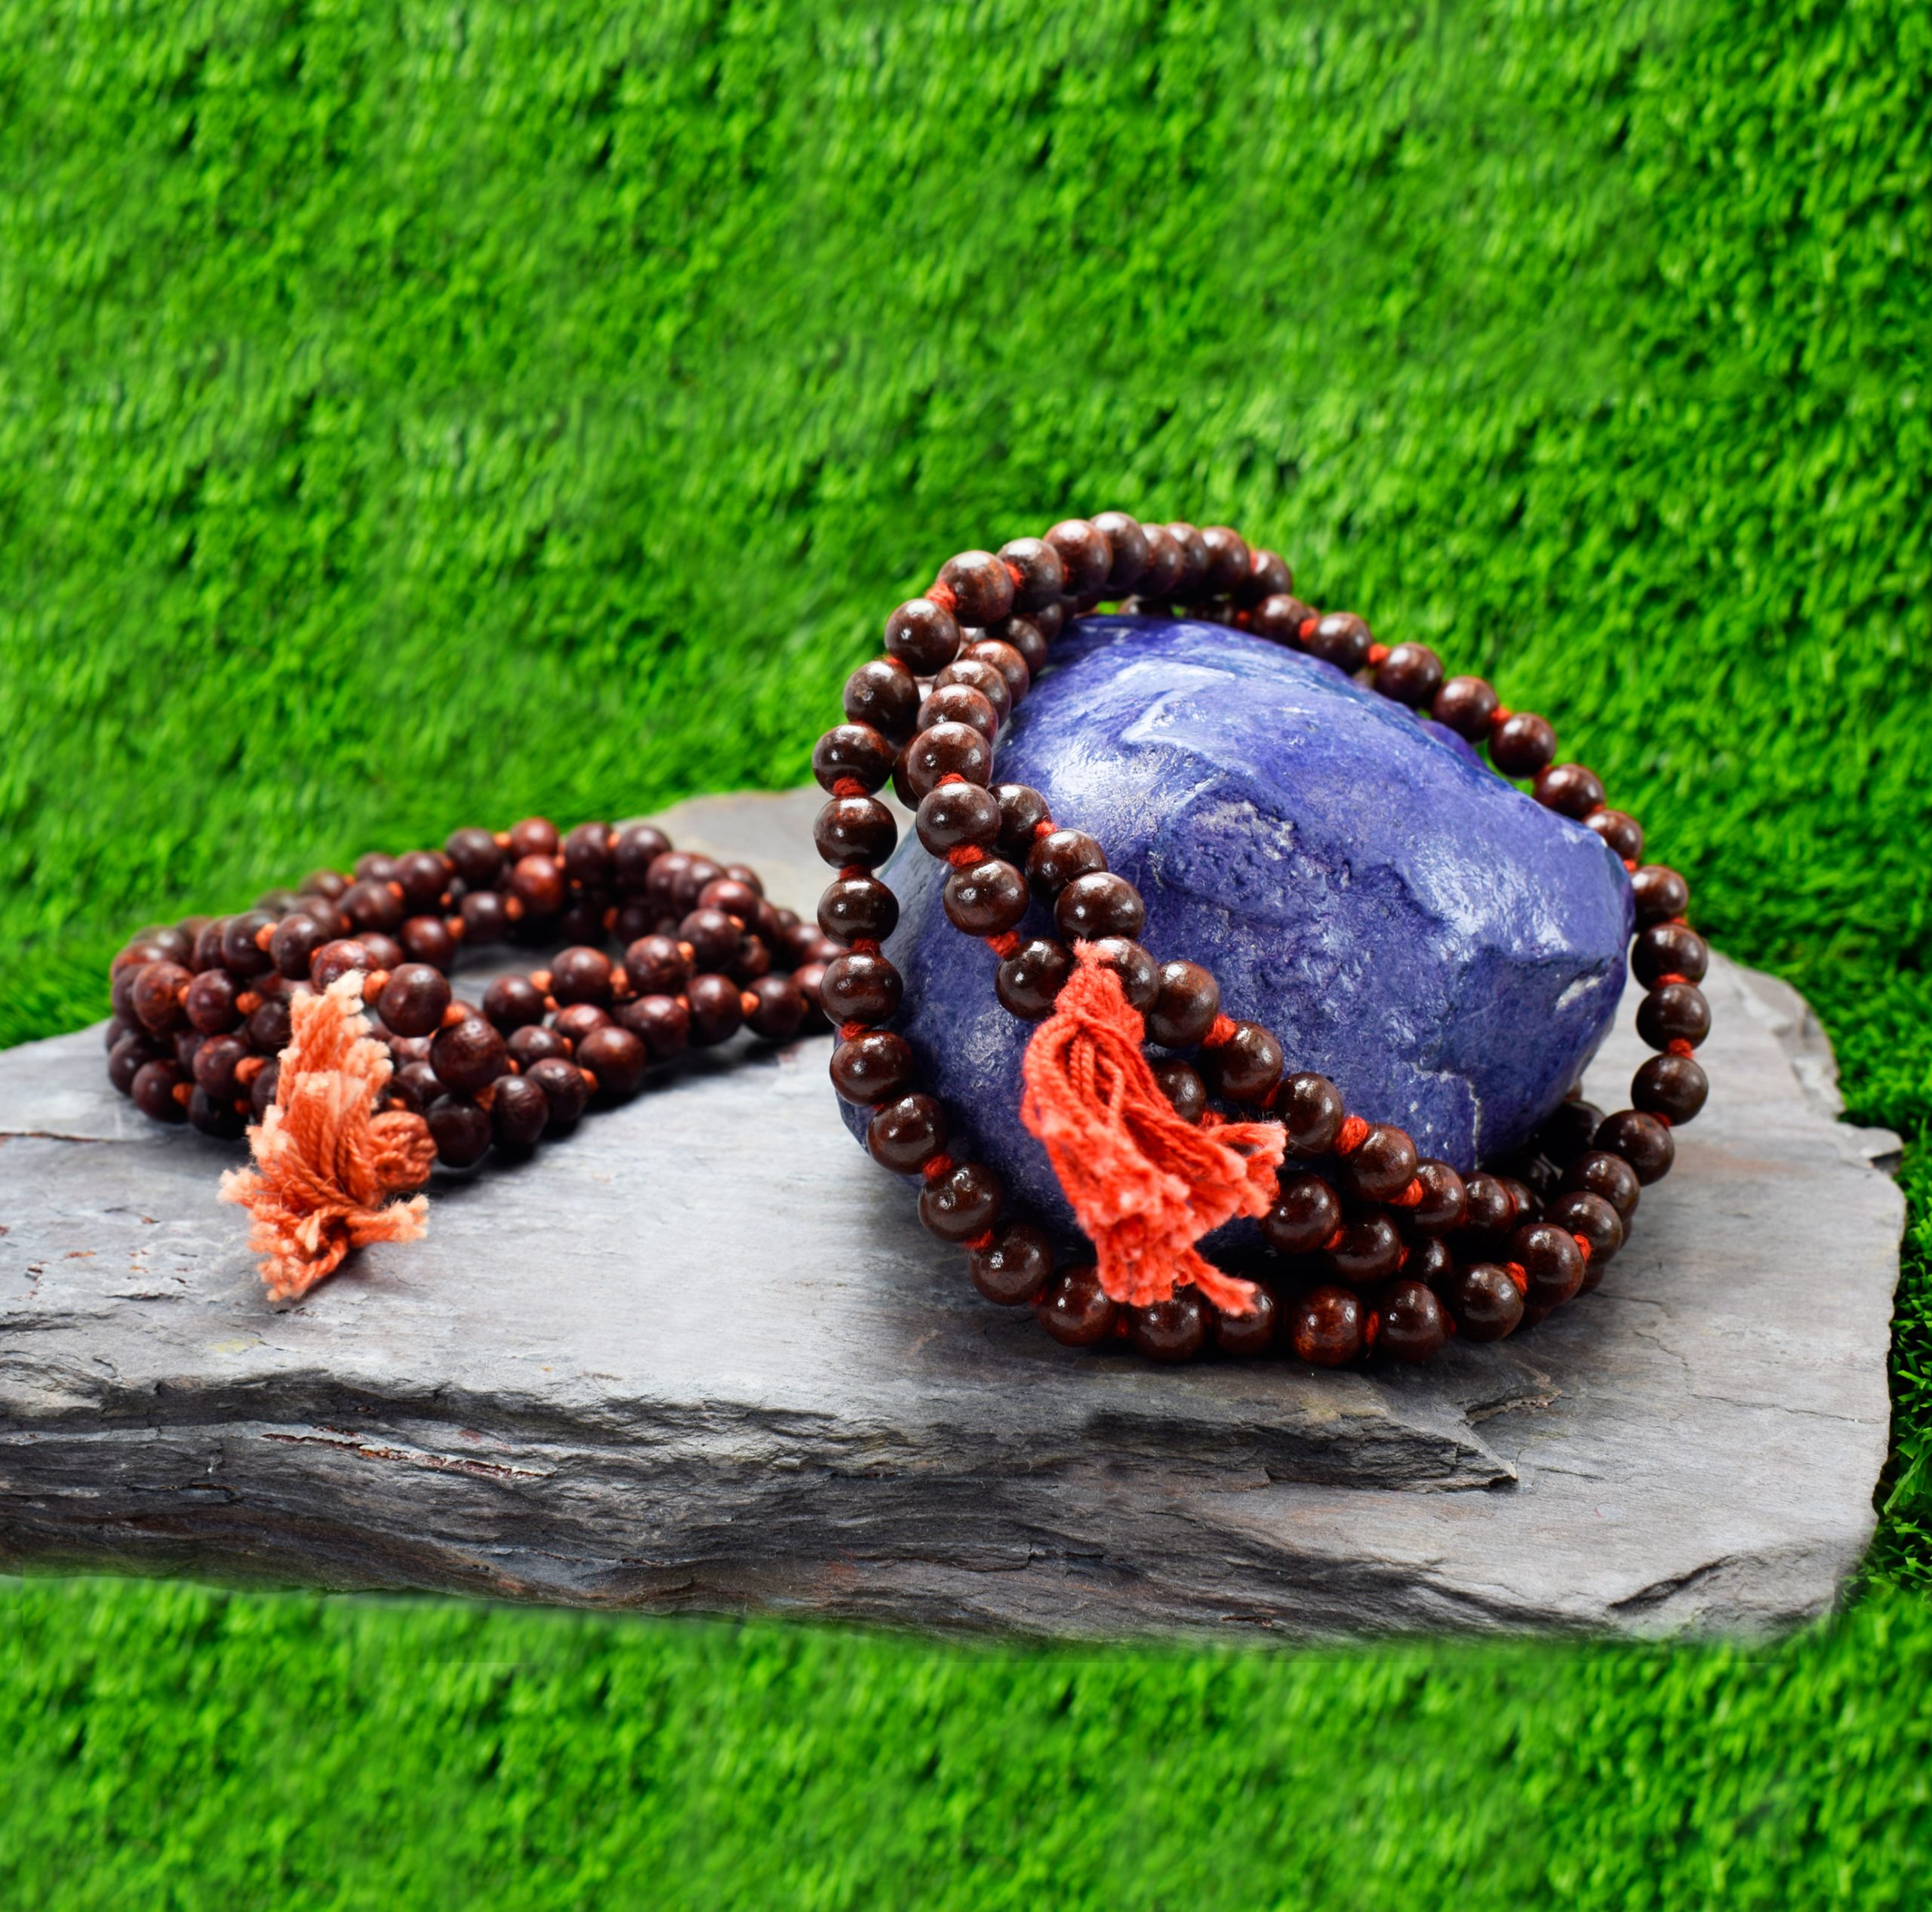 Two beautiful worship's mala of dark red color sandalwood MALA placed on a rock in front of green blur background.